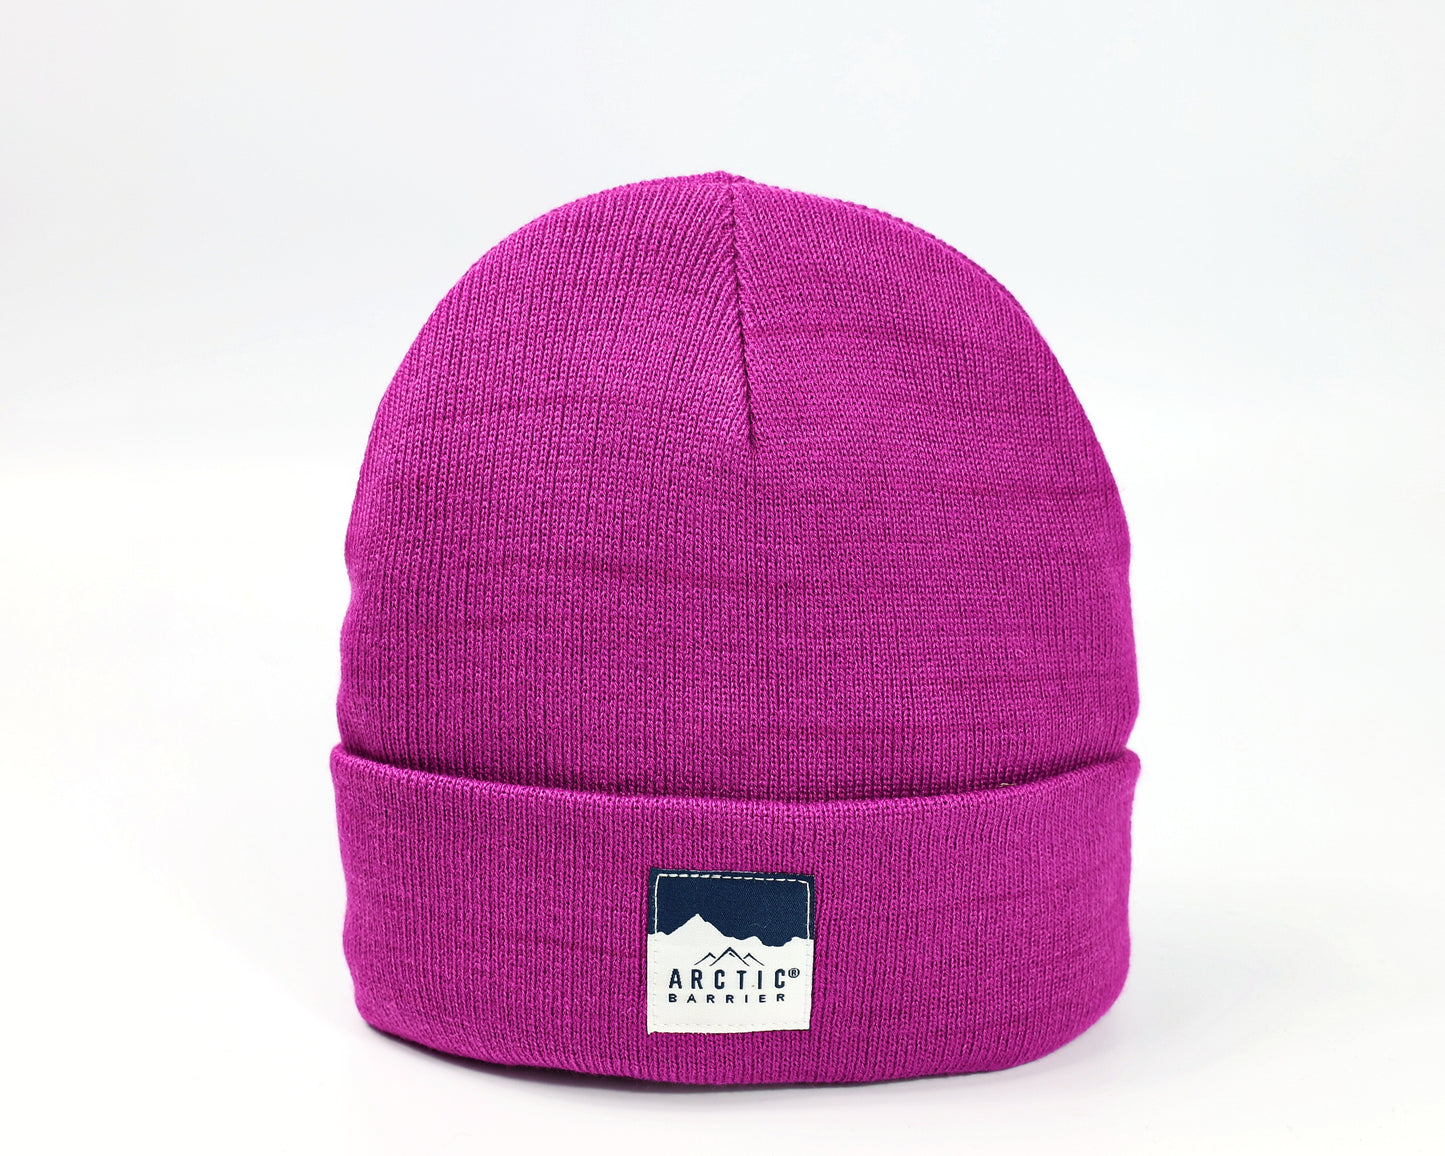 Acrylic Jersey Knit Beanie with Lining